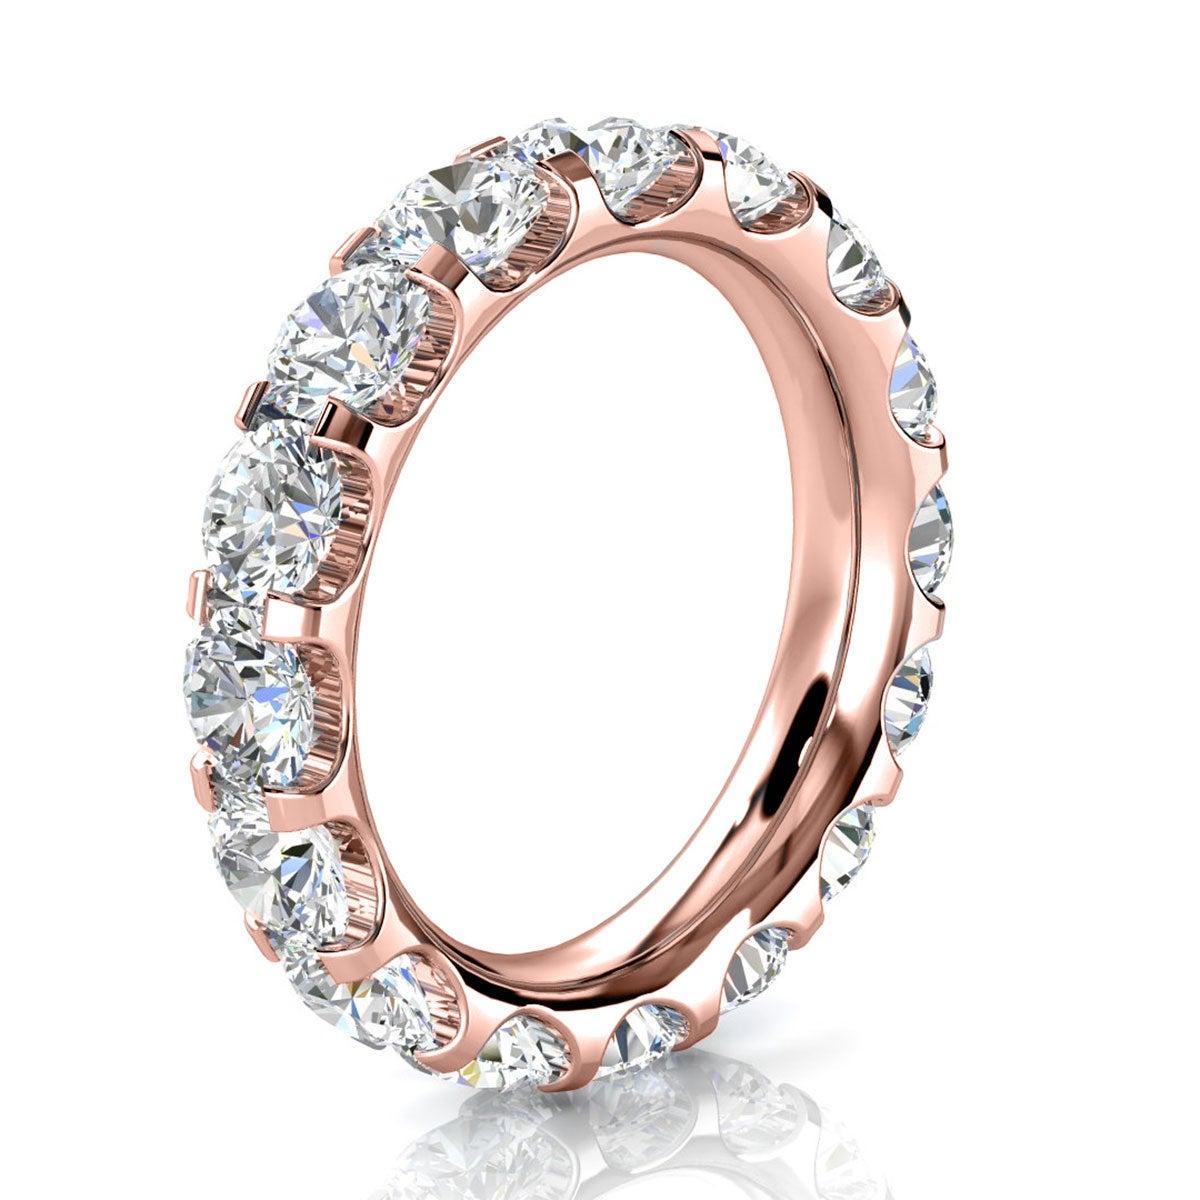 For Sale:  18K Rose Gold Viola Eternity Micro-Prong Diamond Ring '4 Ct. Tw' 2